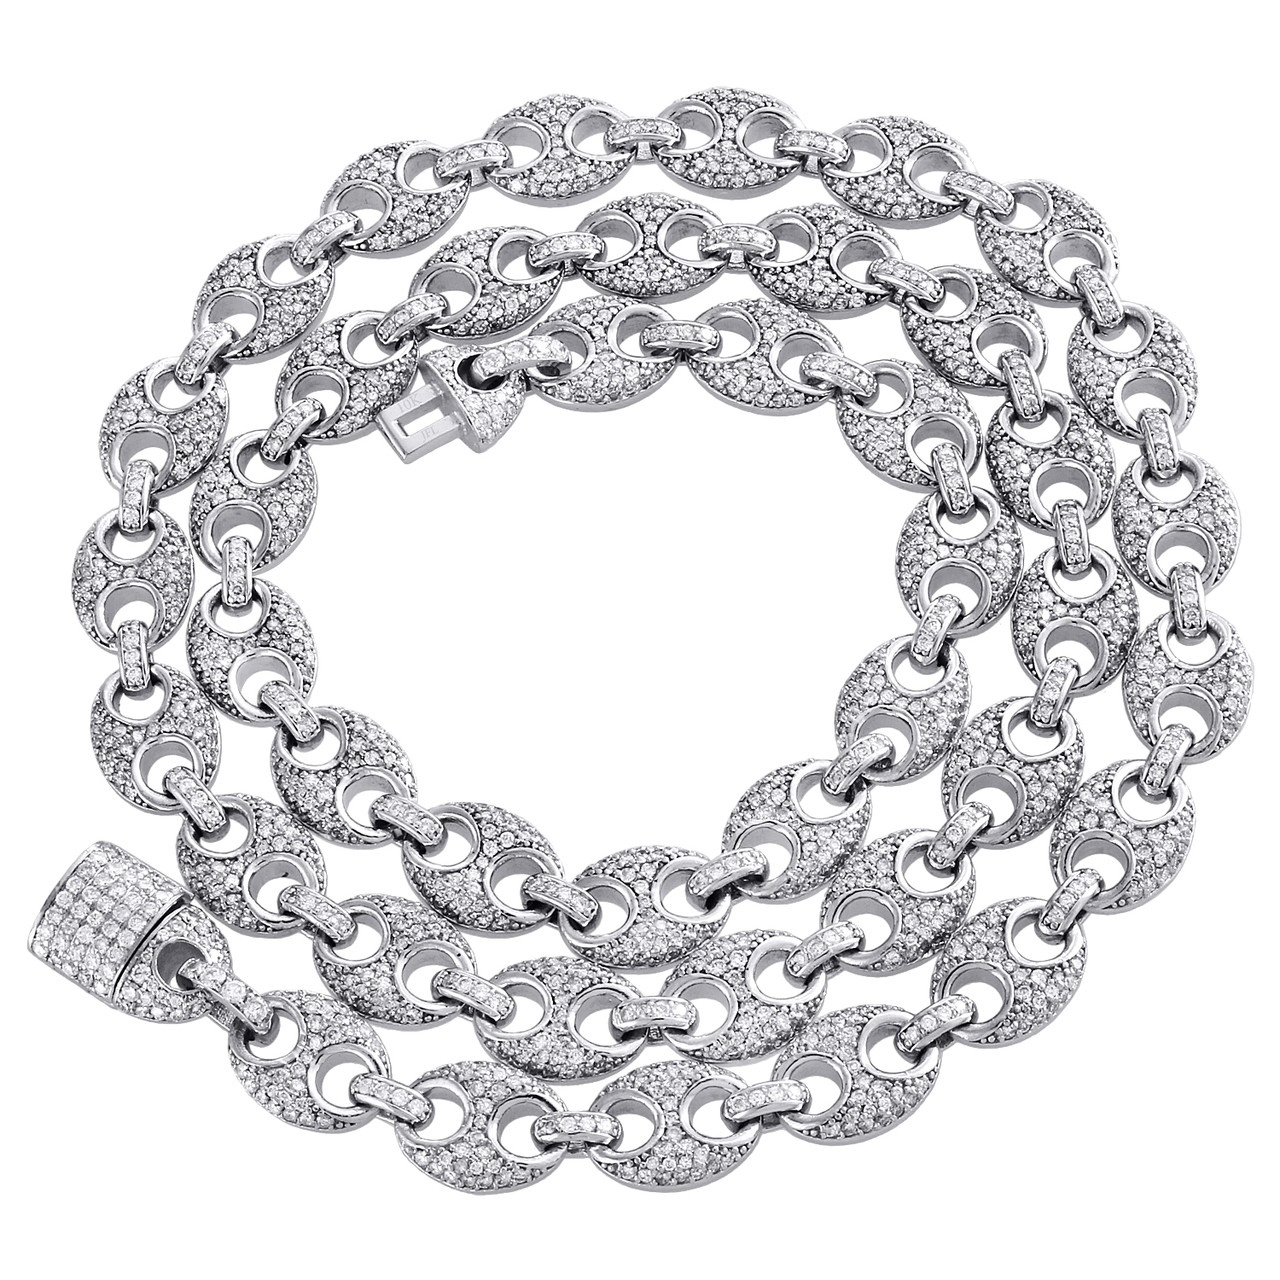 I forening linned 10K White Gold 9.50mm Diamond Solid Puff Gucci Link Chain 22" Necklace  11.60 CT. - JFL Diamonds & Timepieces